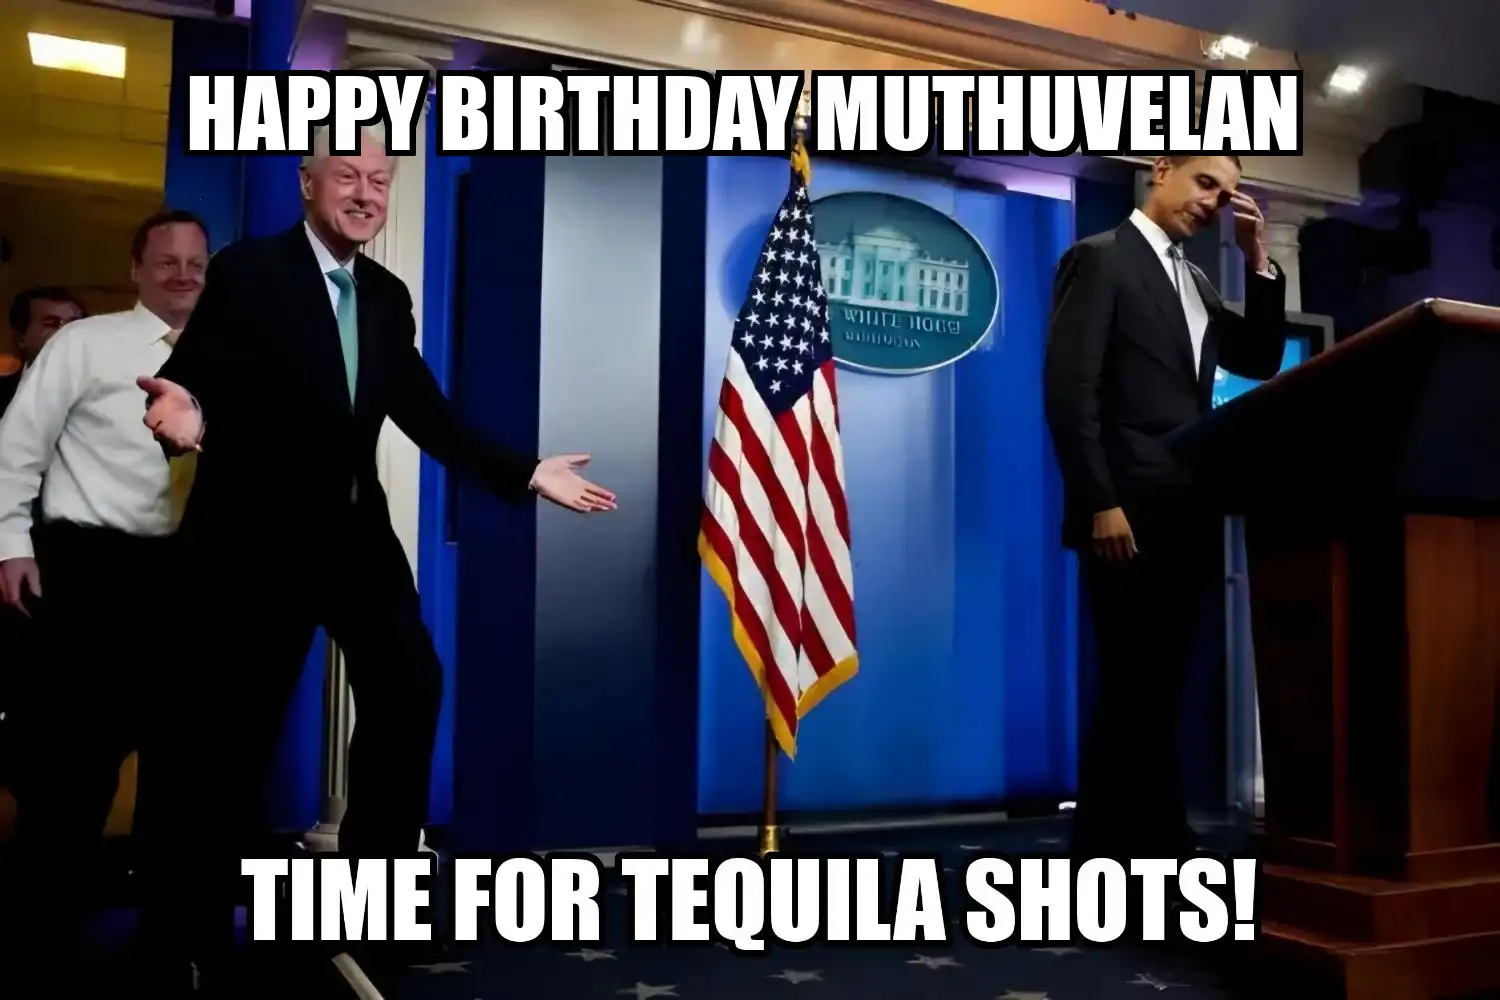 Happy Birthday Muthuvelan Time For Tequila Shots Memes